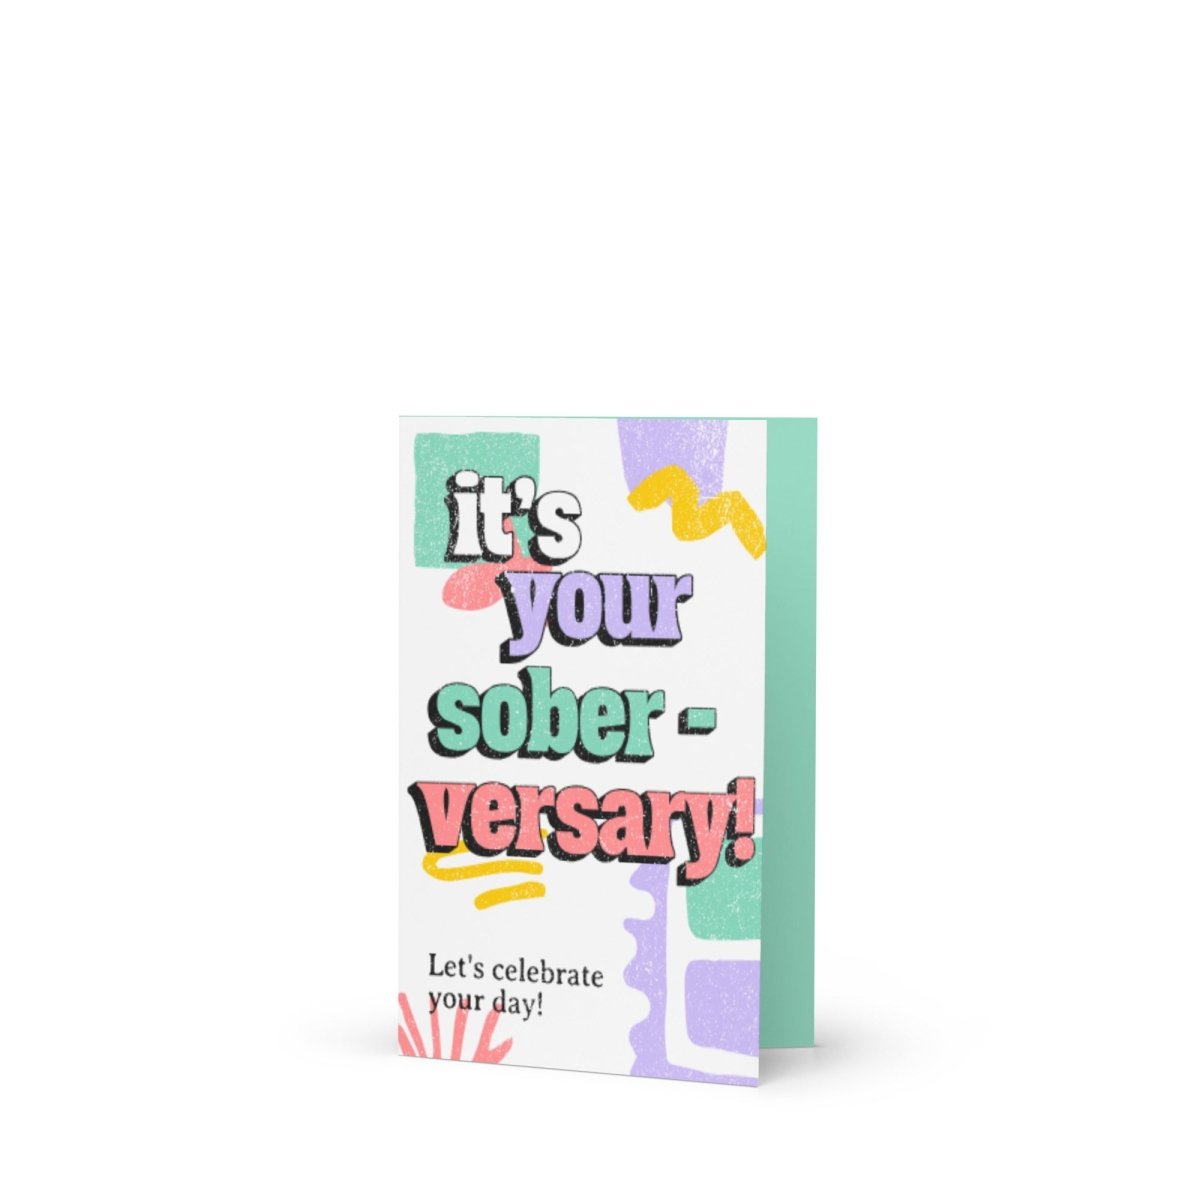 It's Your Soberversary! Let's Celebrate Greeting Card - Sobervation